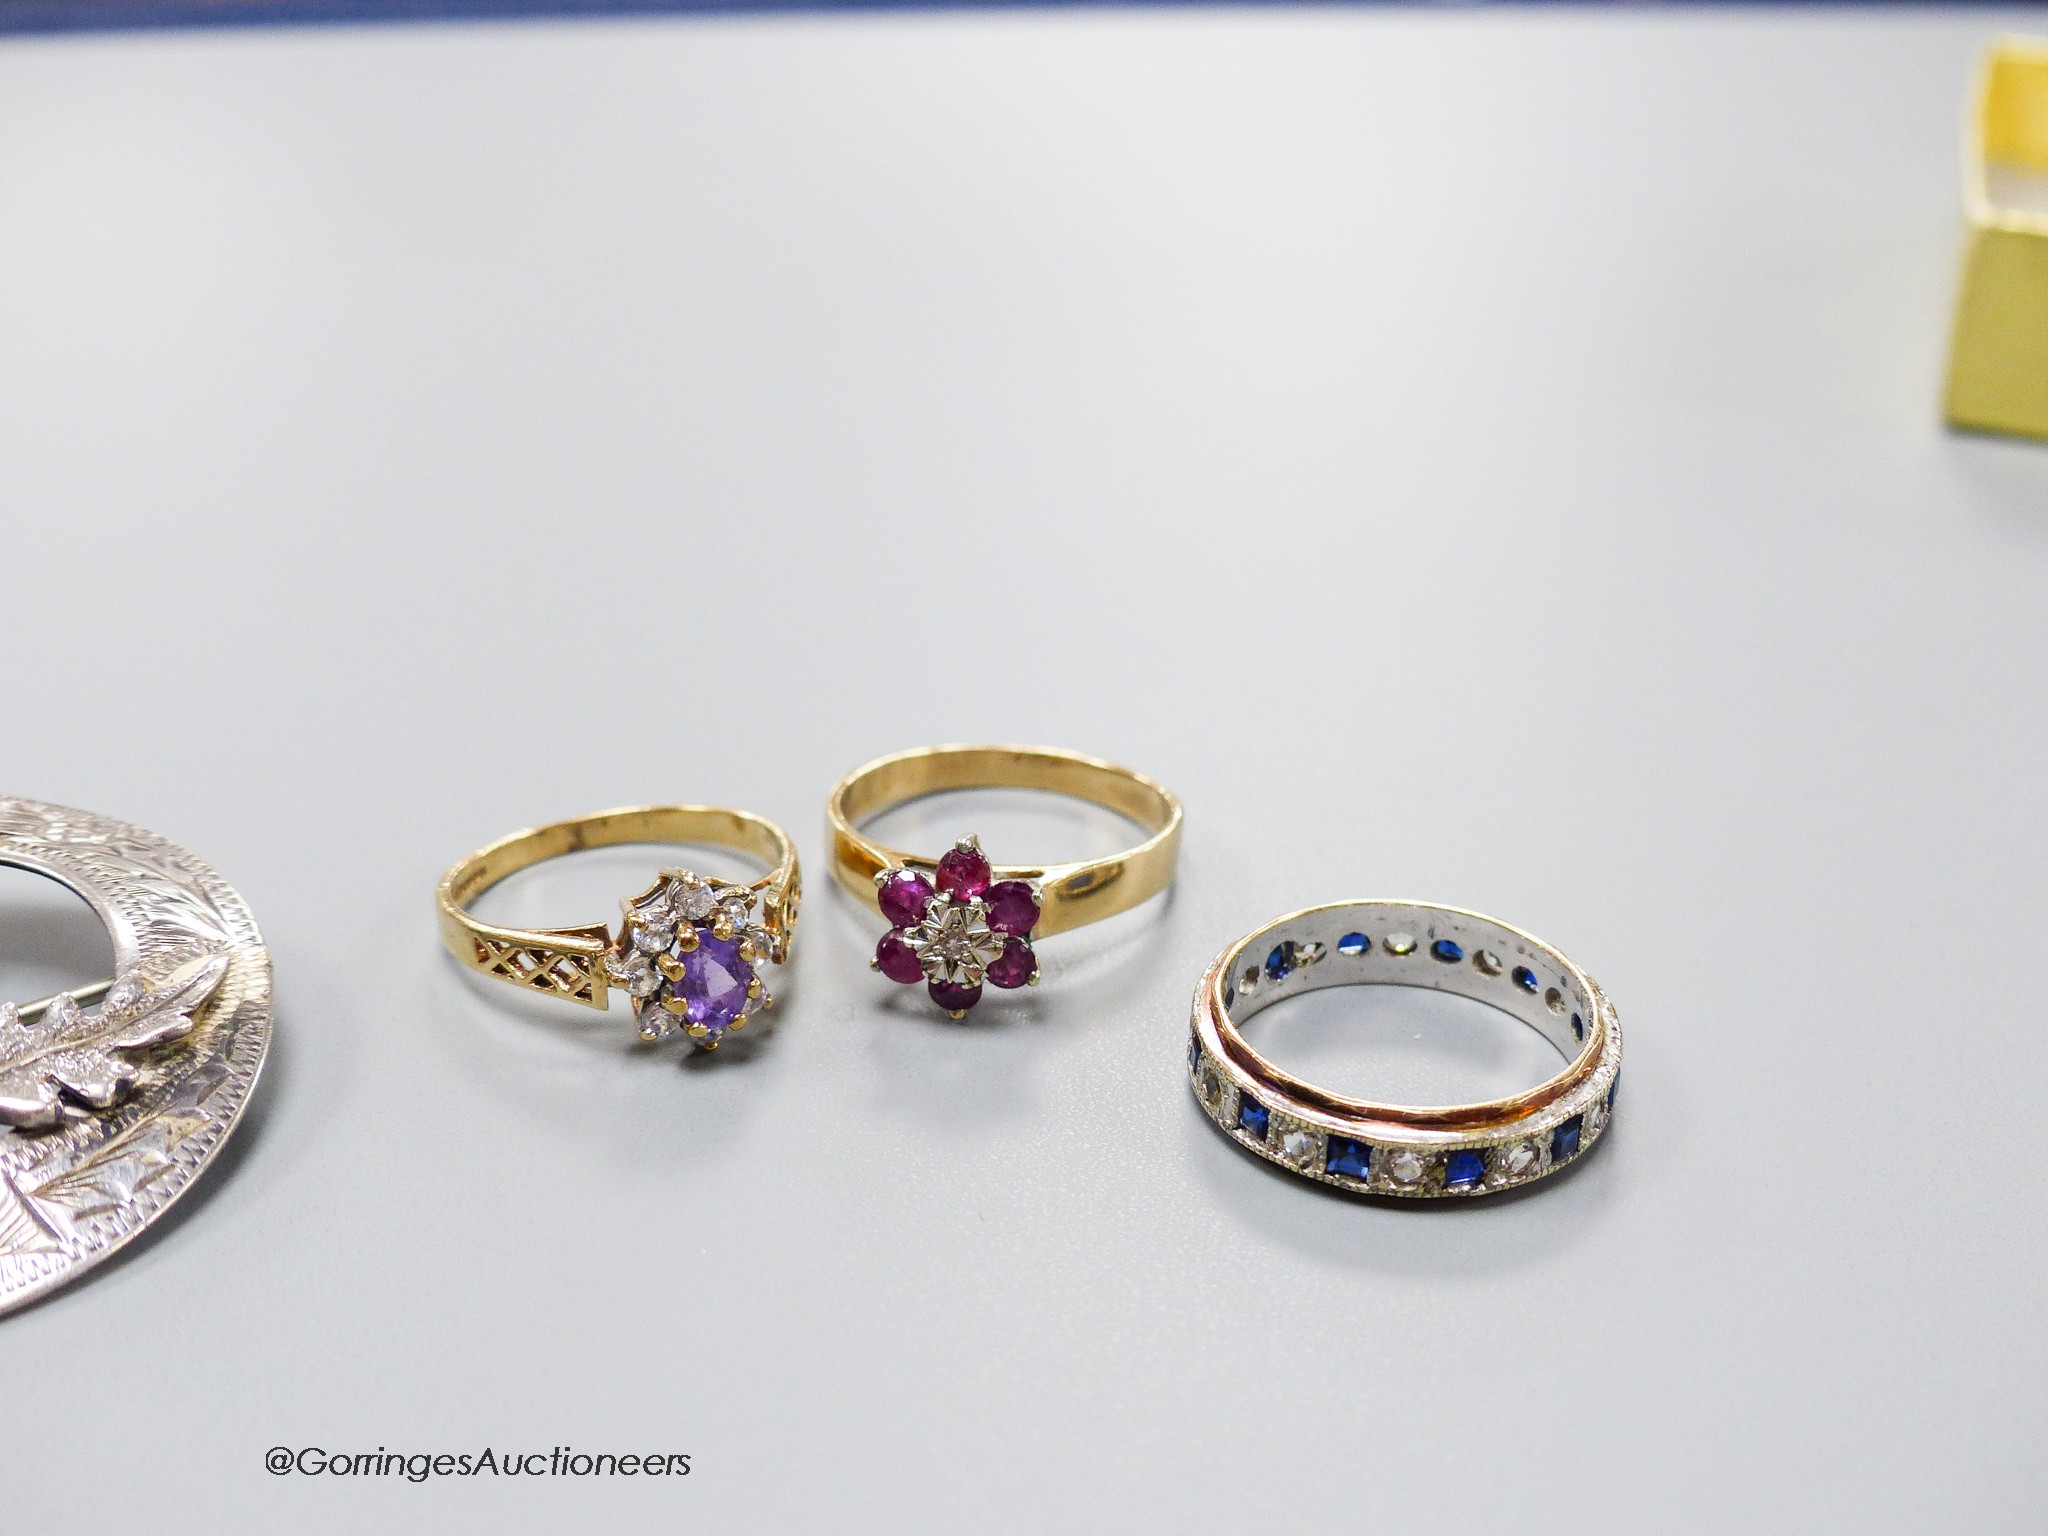 Three assorted modern 9ct gold and gem set dress rings, gross 7.3 grams, a Scottish silver Iona brooch and one other Scottish gem set brooch.